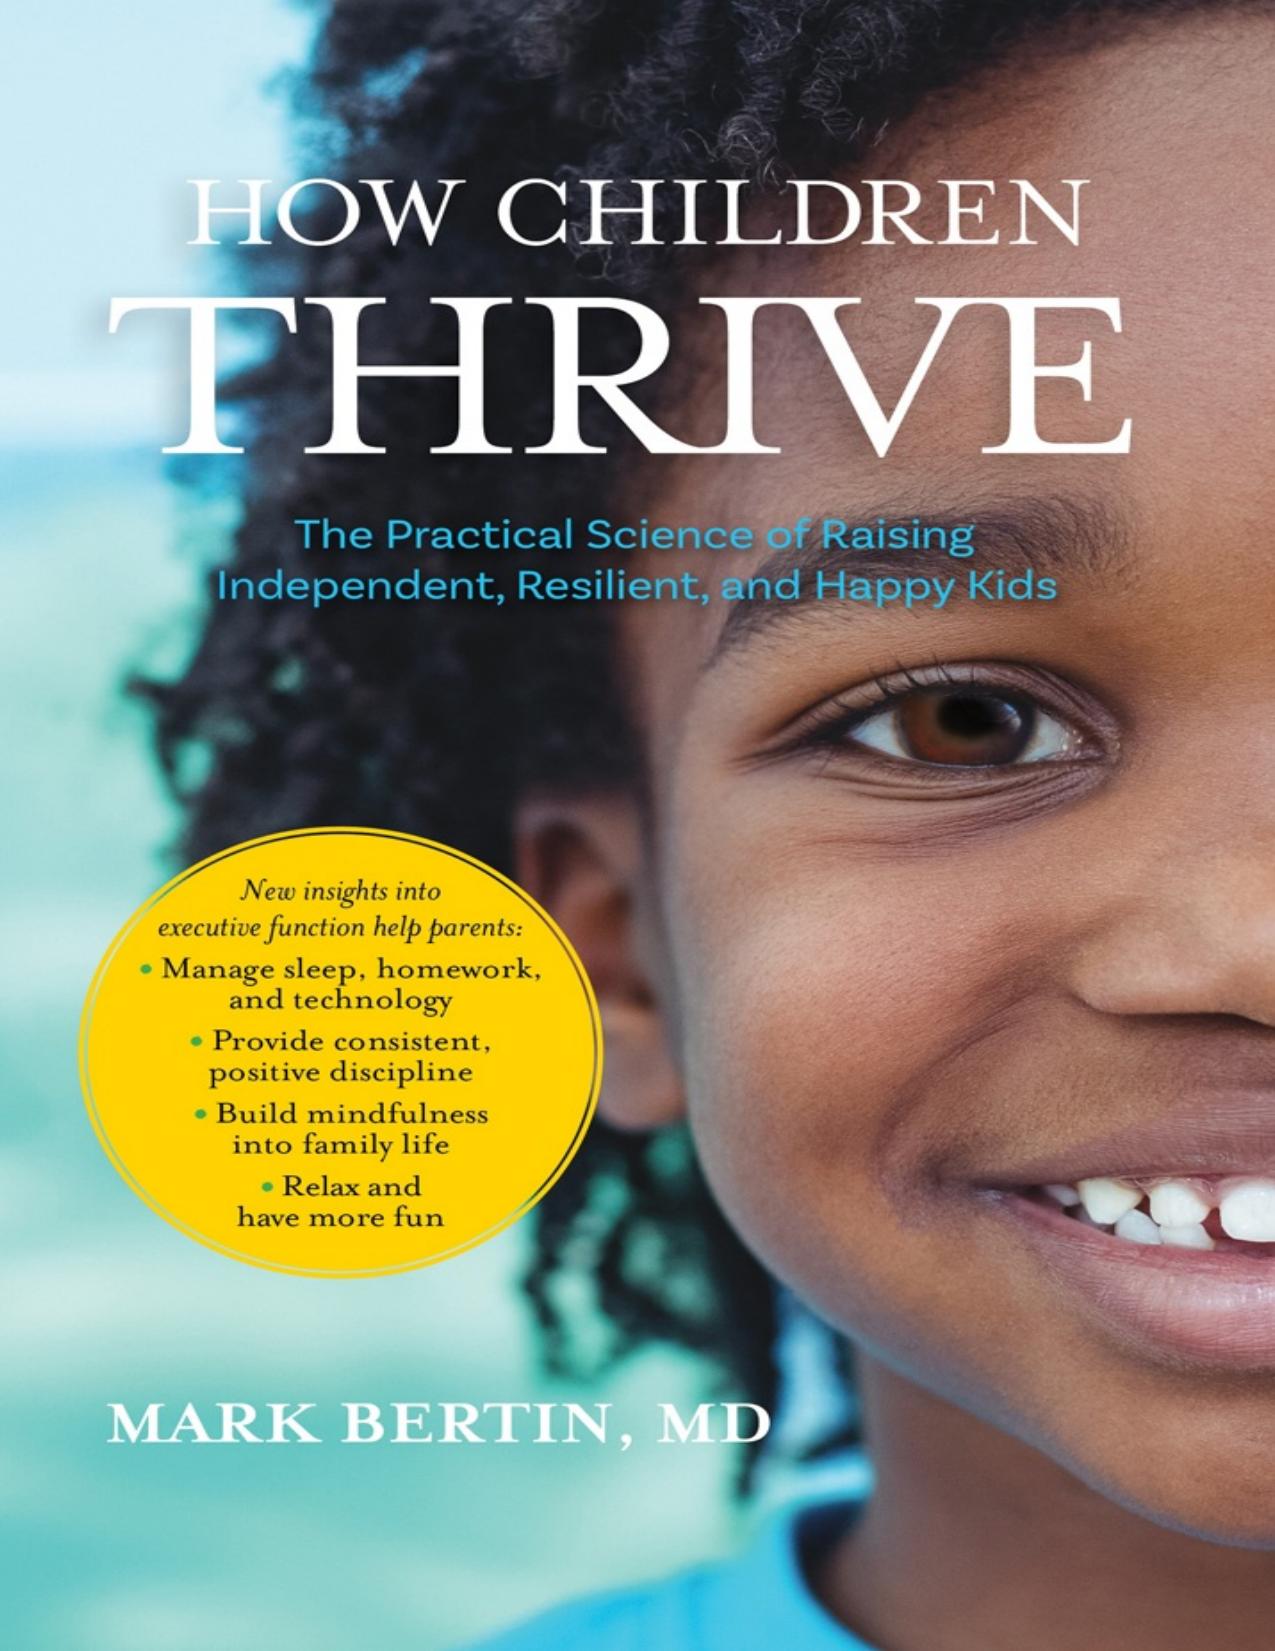 How Children Thrive: The Practical Science of Raising Independent, Resilient, and Happy Kids - PDFDrive.com